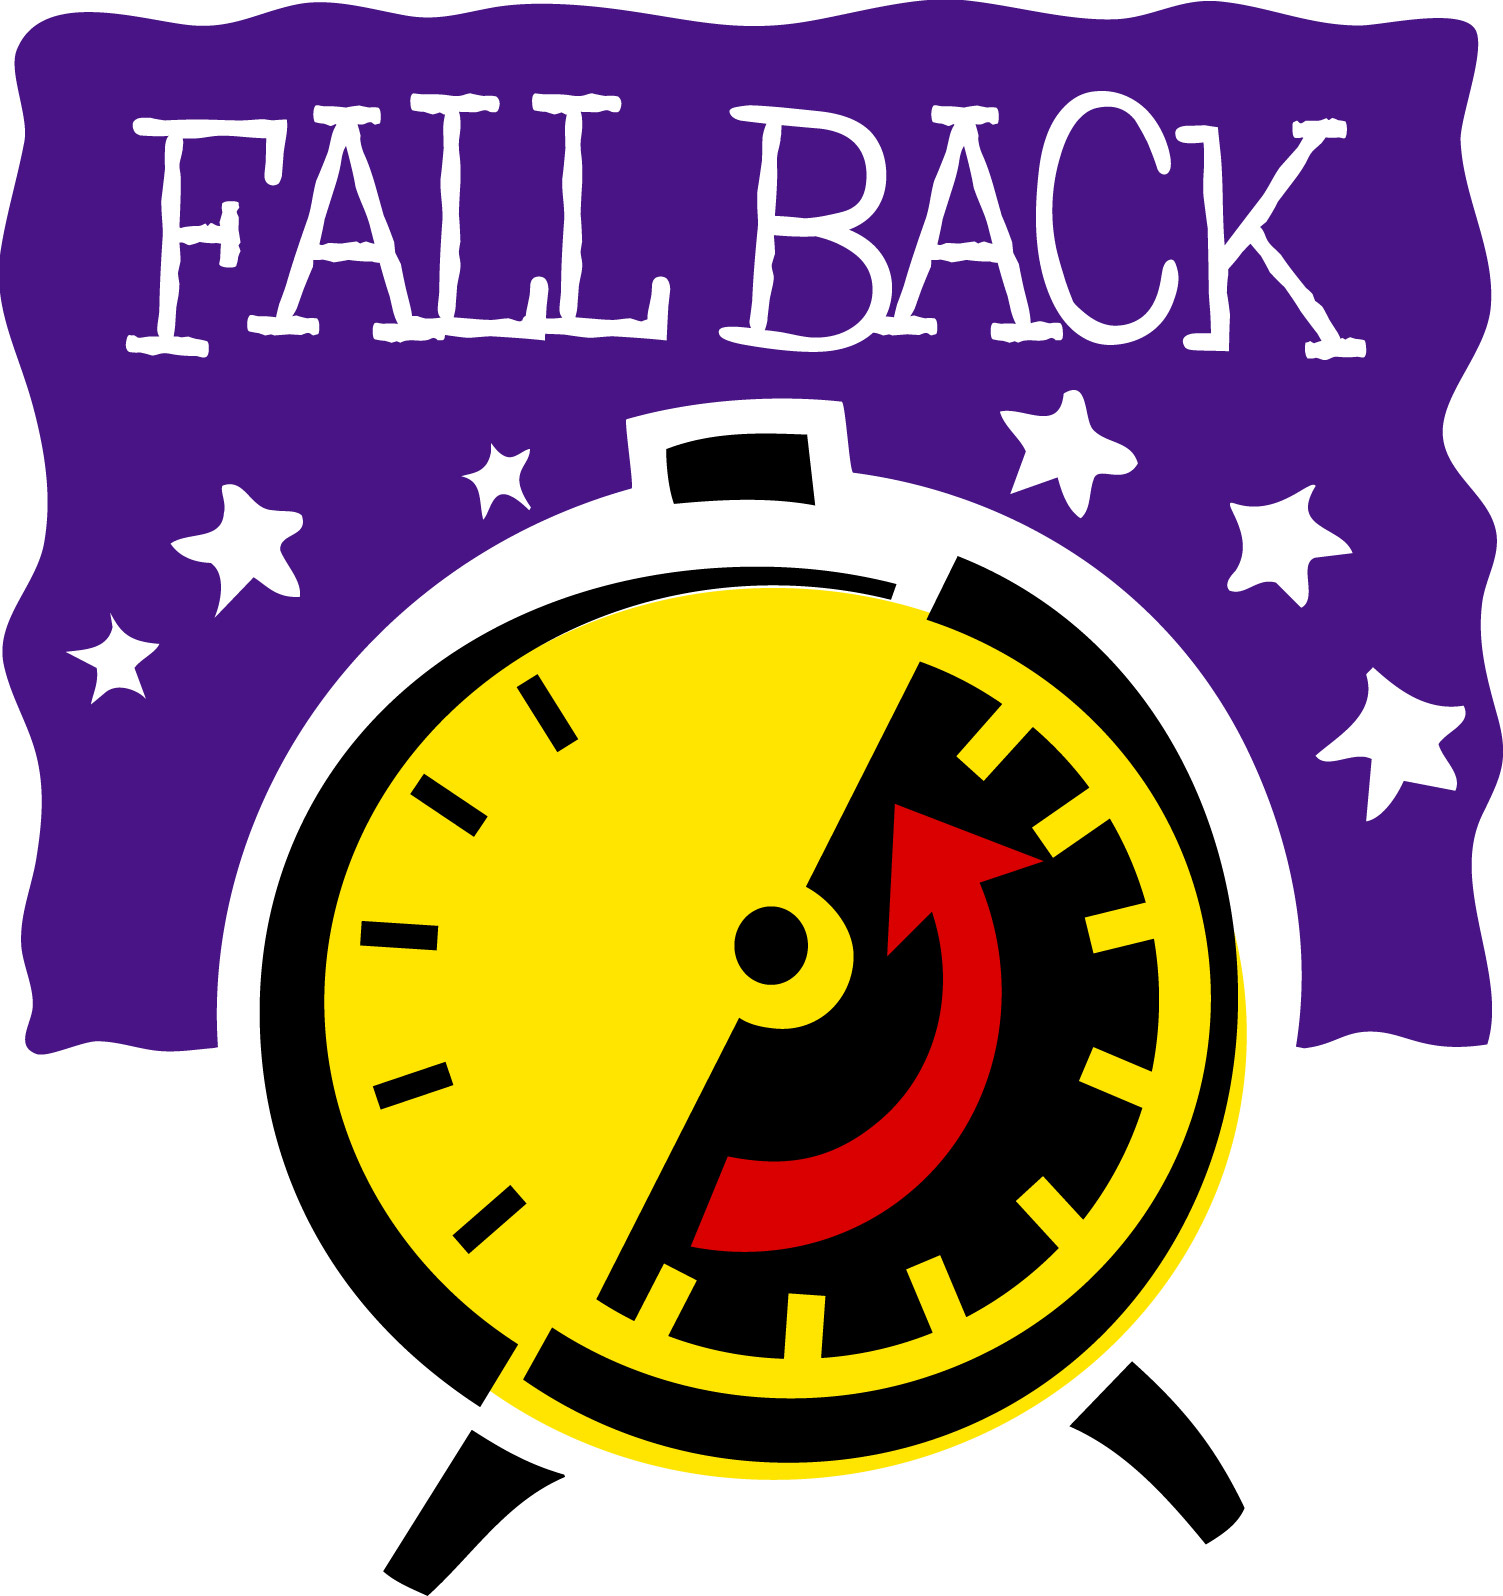 Daylight Savings Time Clipart Cliparts Co. 0605b5a8e3aabcec80229b3ff94ab3 .